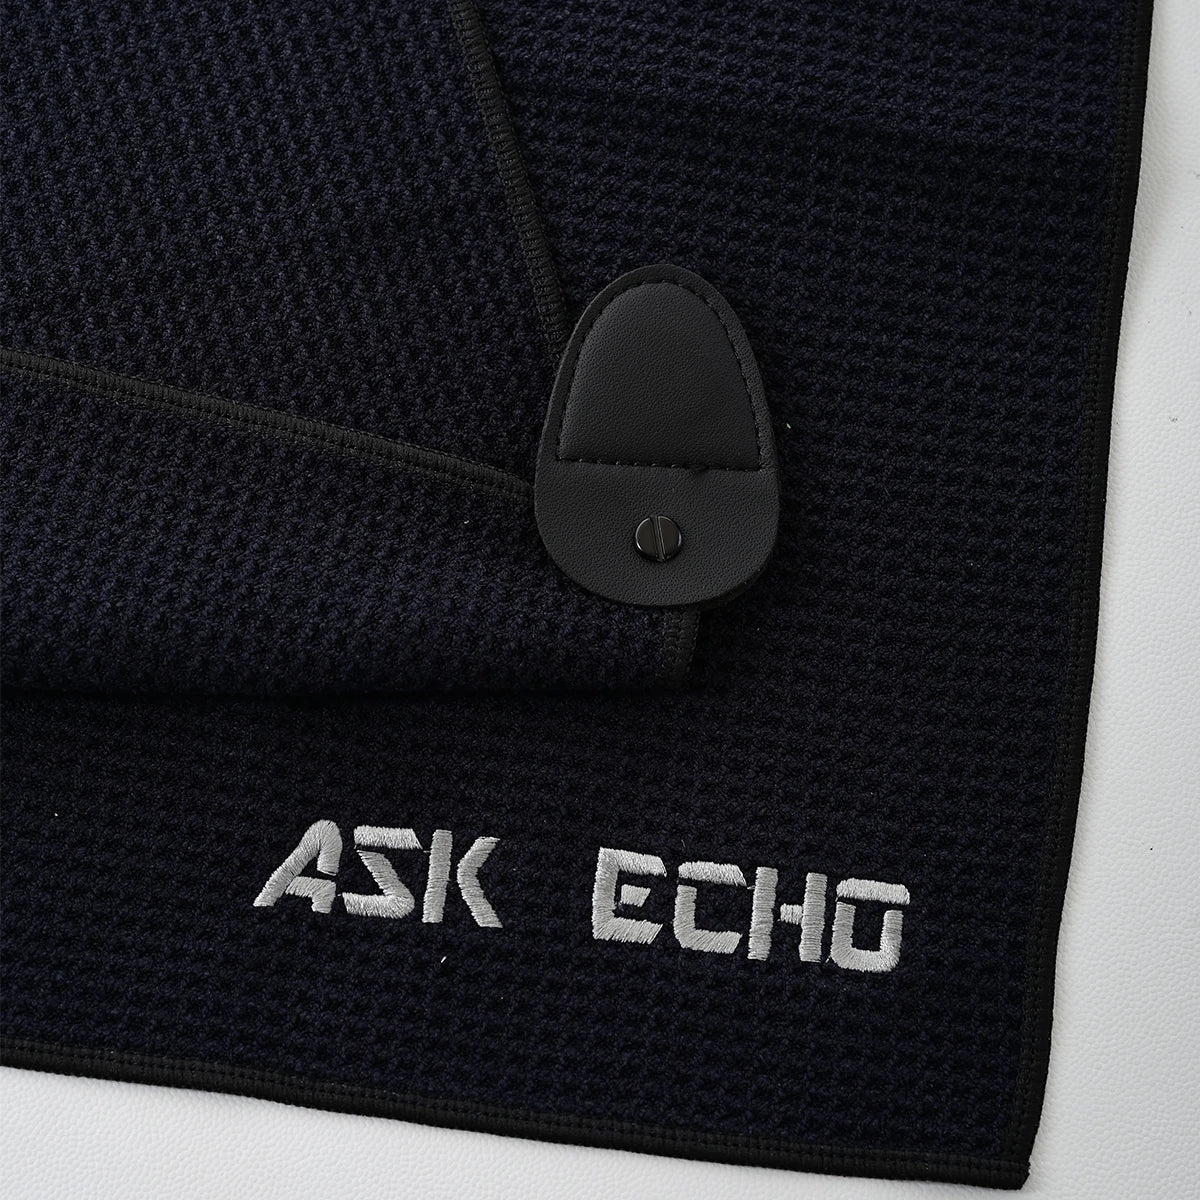 ASK ECHO Waffle Weave Microfiber With Magnetic Golf Cotton Towel